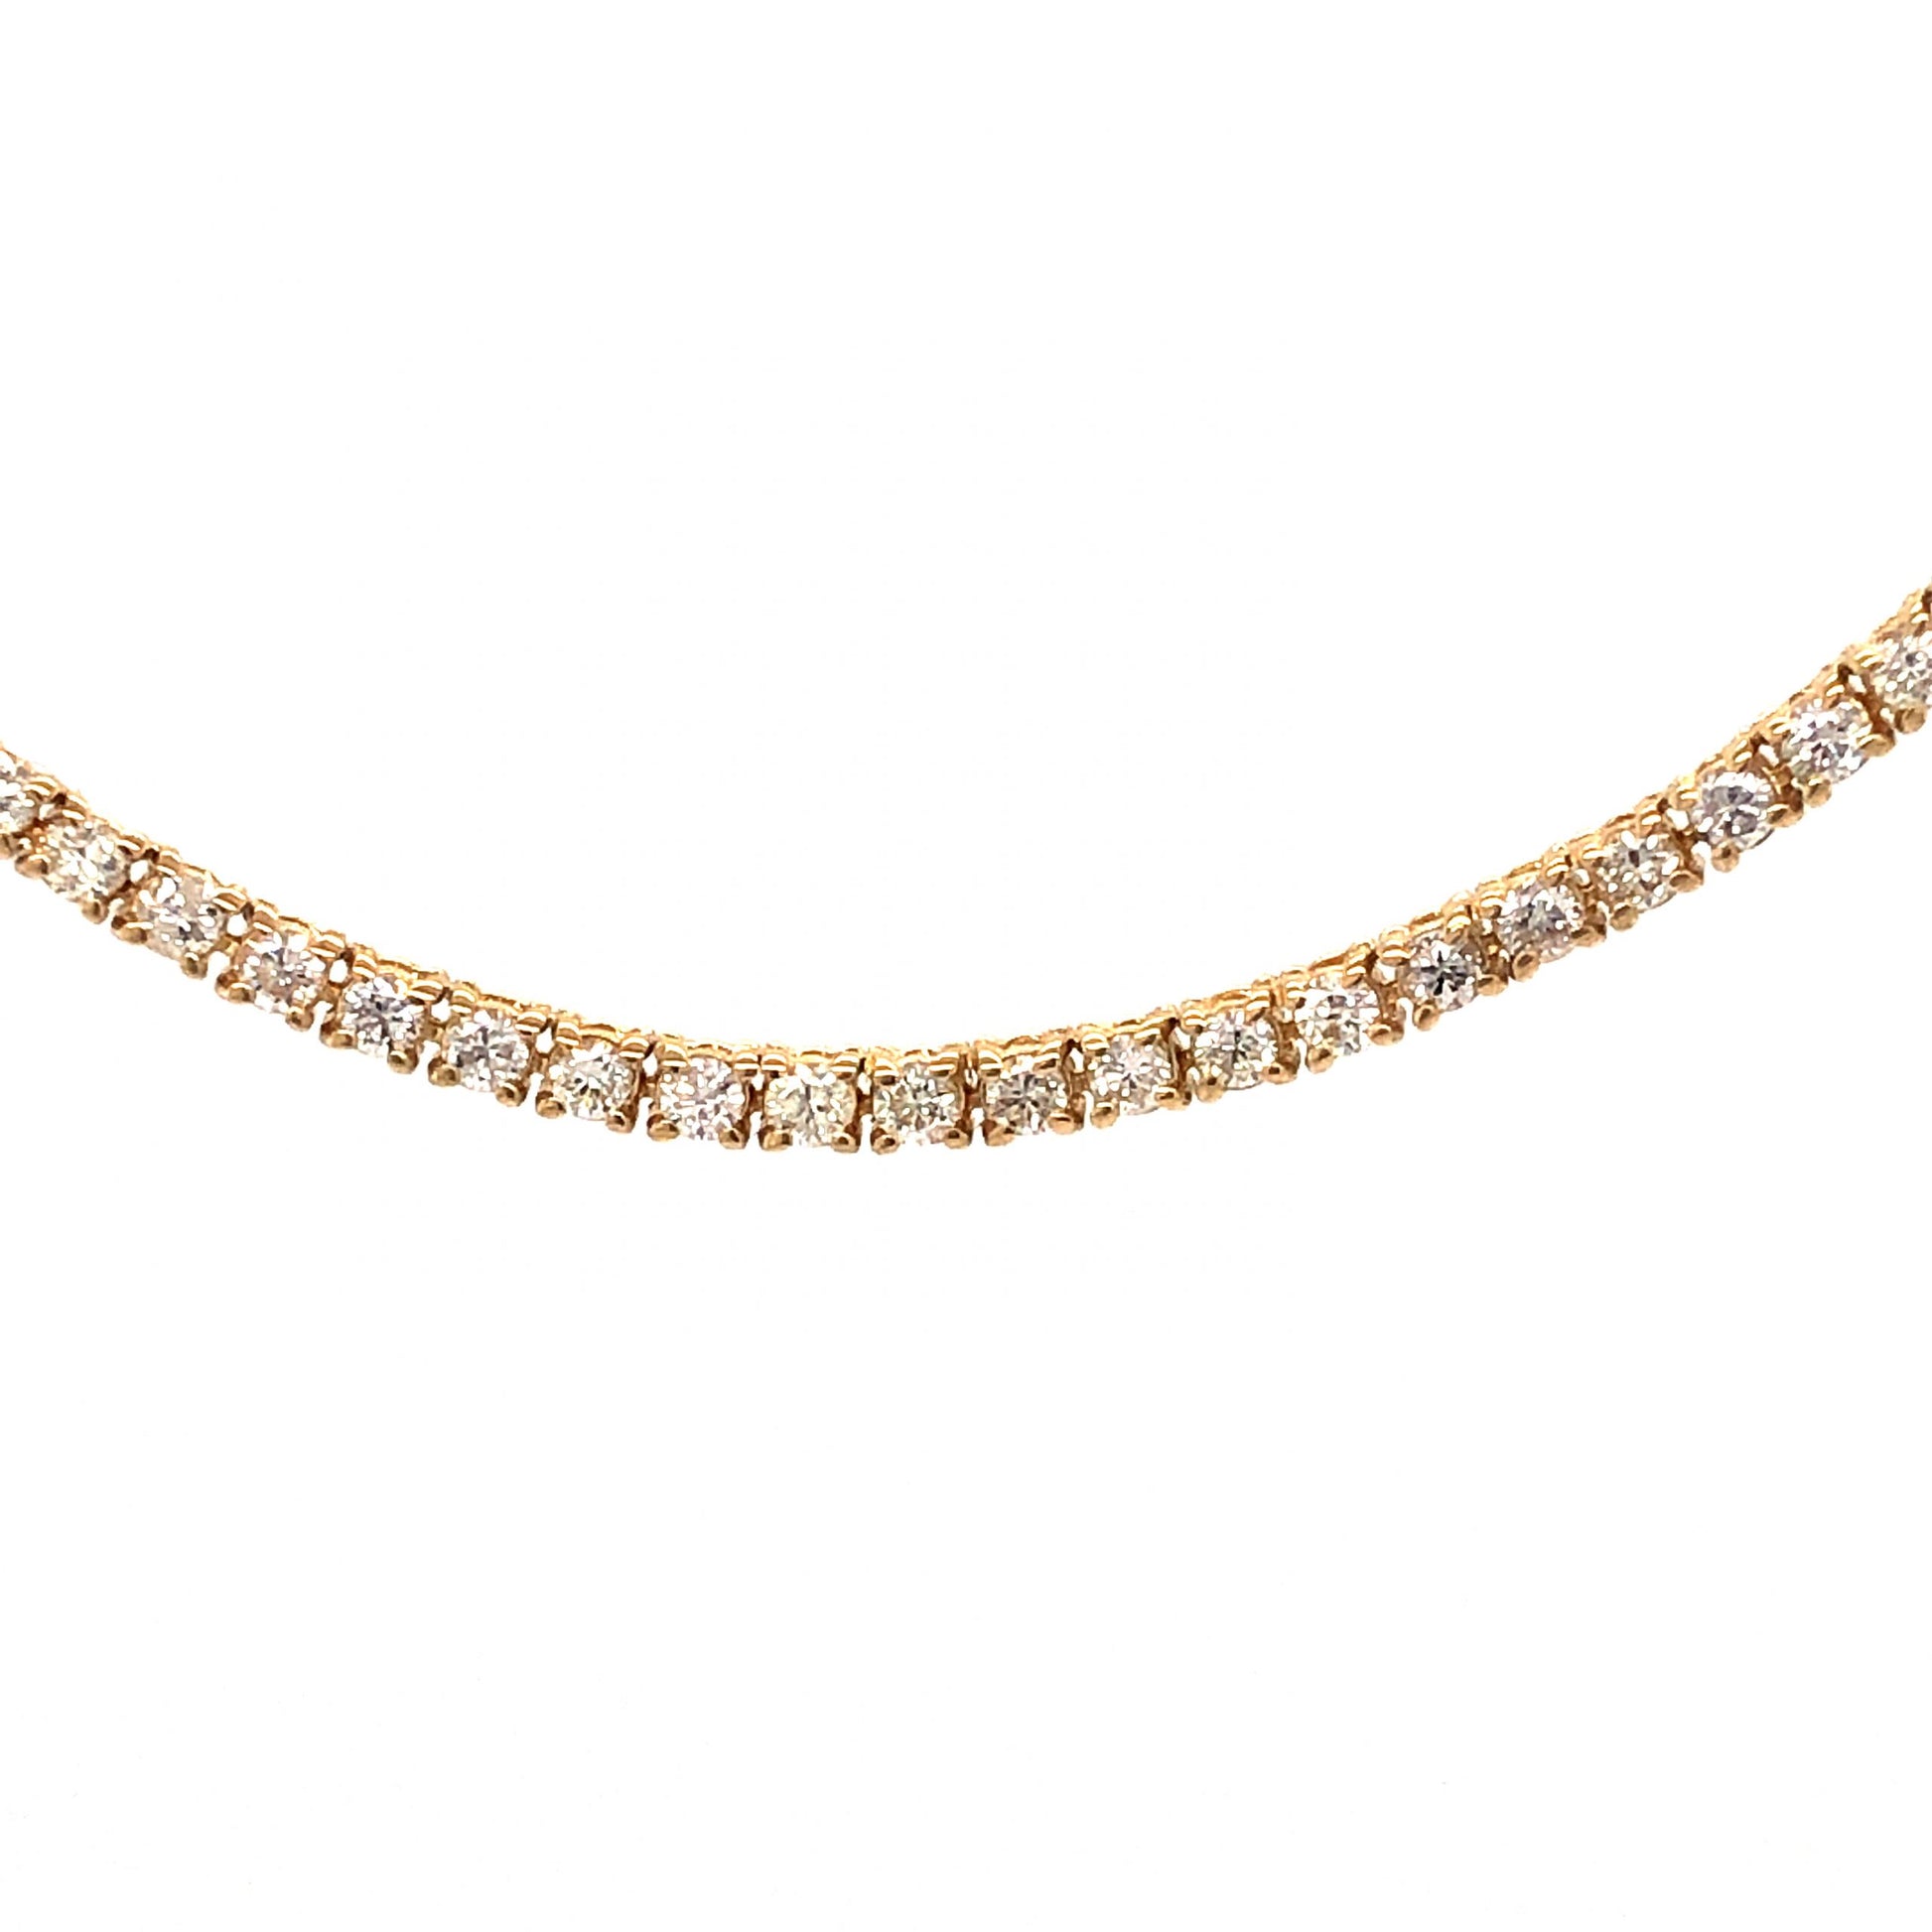 4.50 Diamond Necklace in 14K Yellow Gold